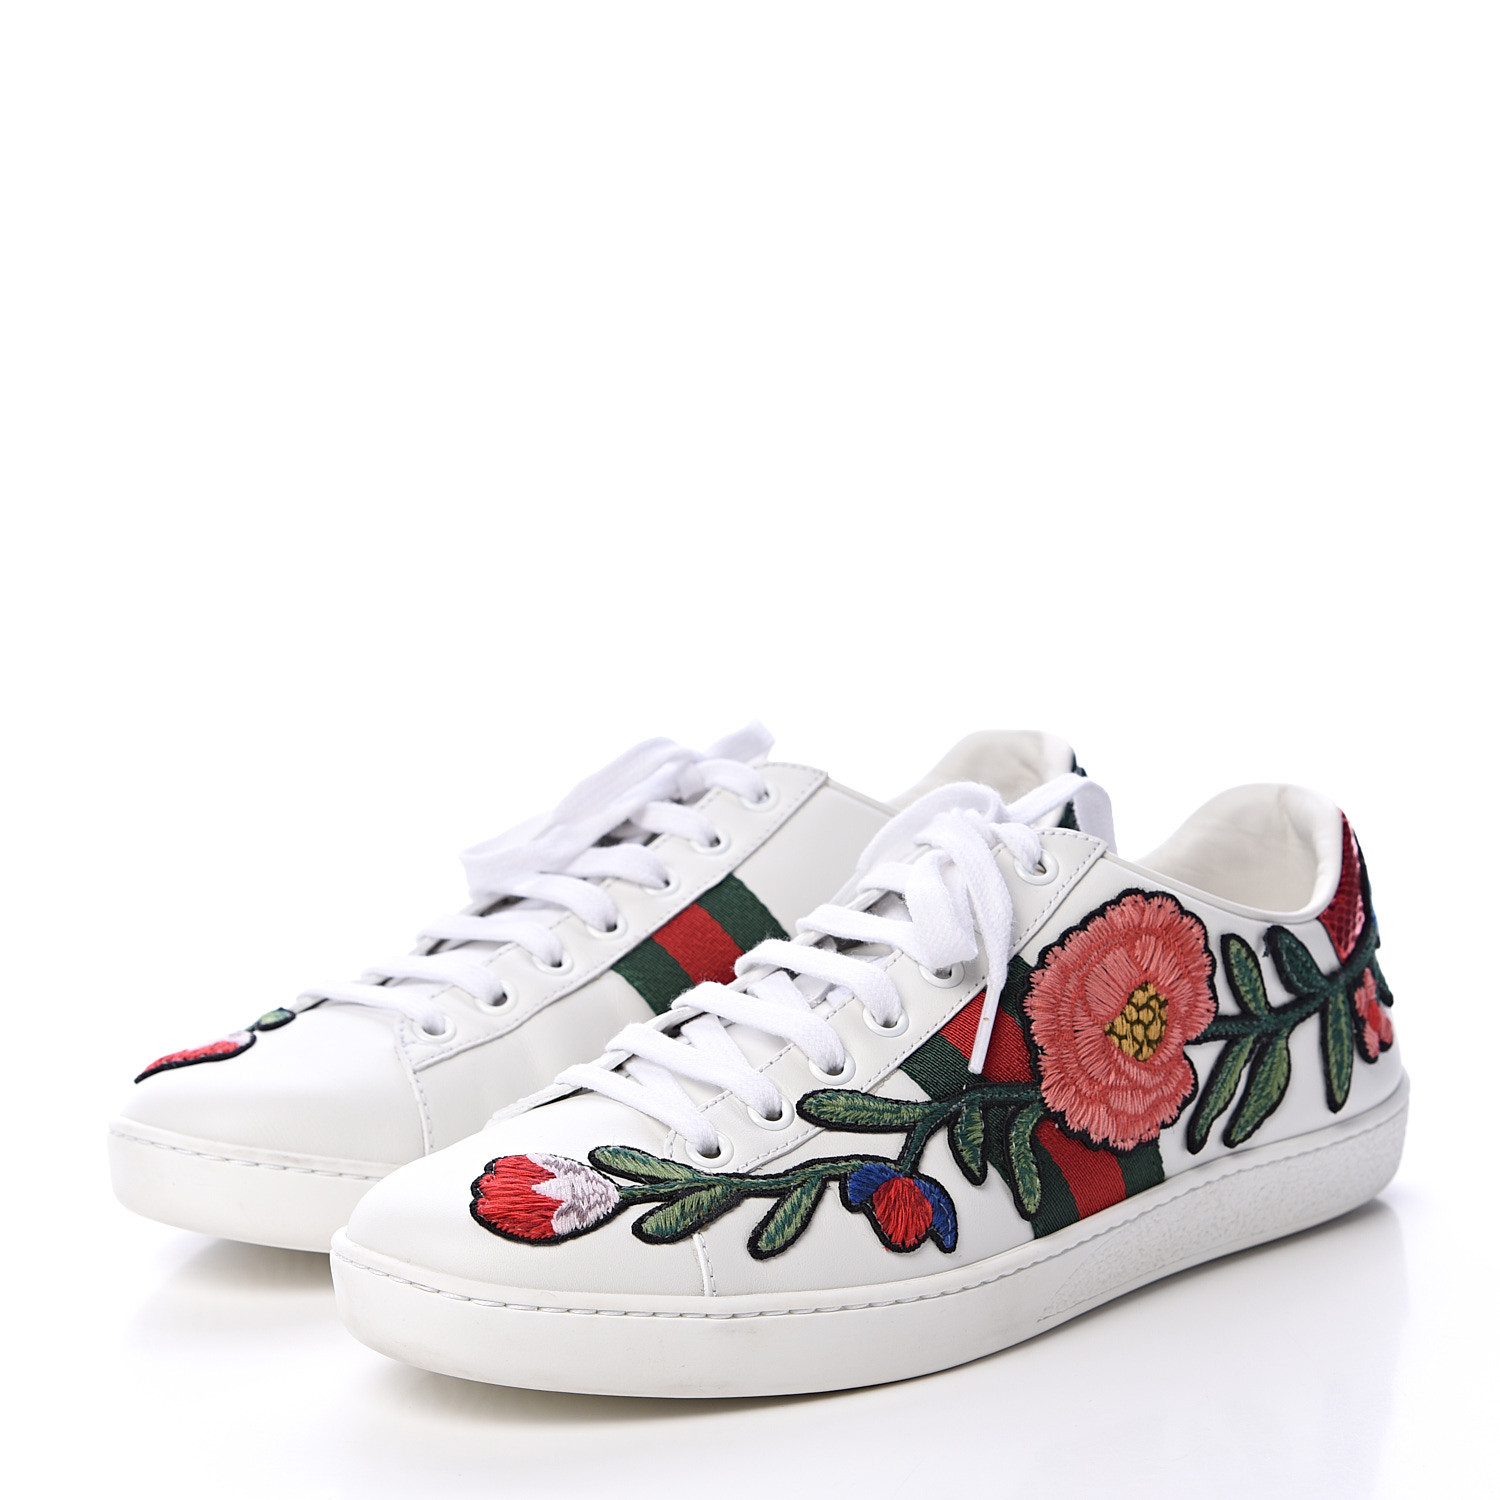 GUCCI Calfskin Web Floral Embroidered Womens Ace Sneakers 38.5 White 554471